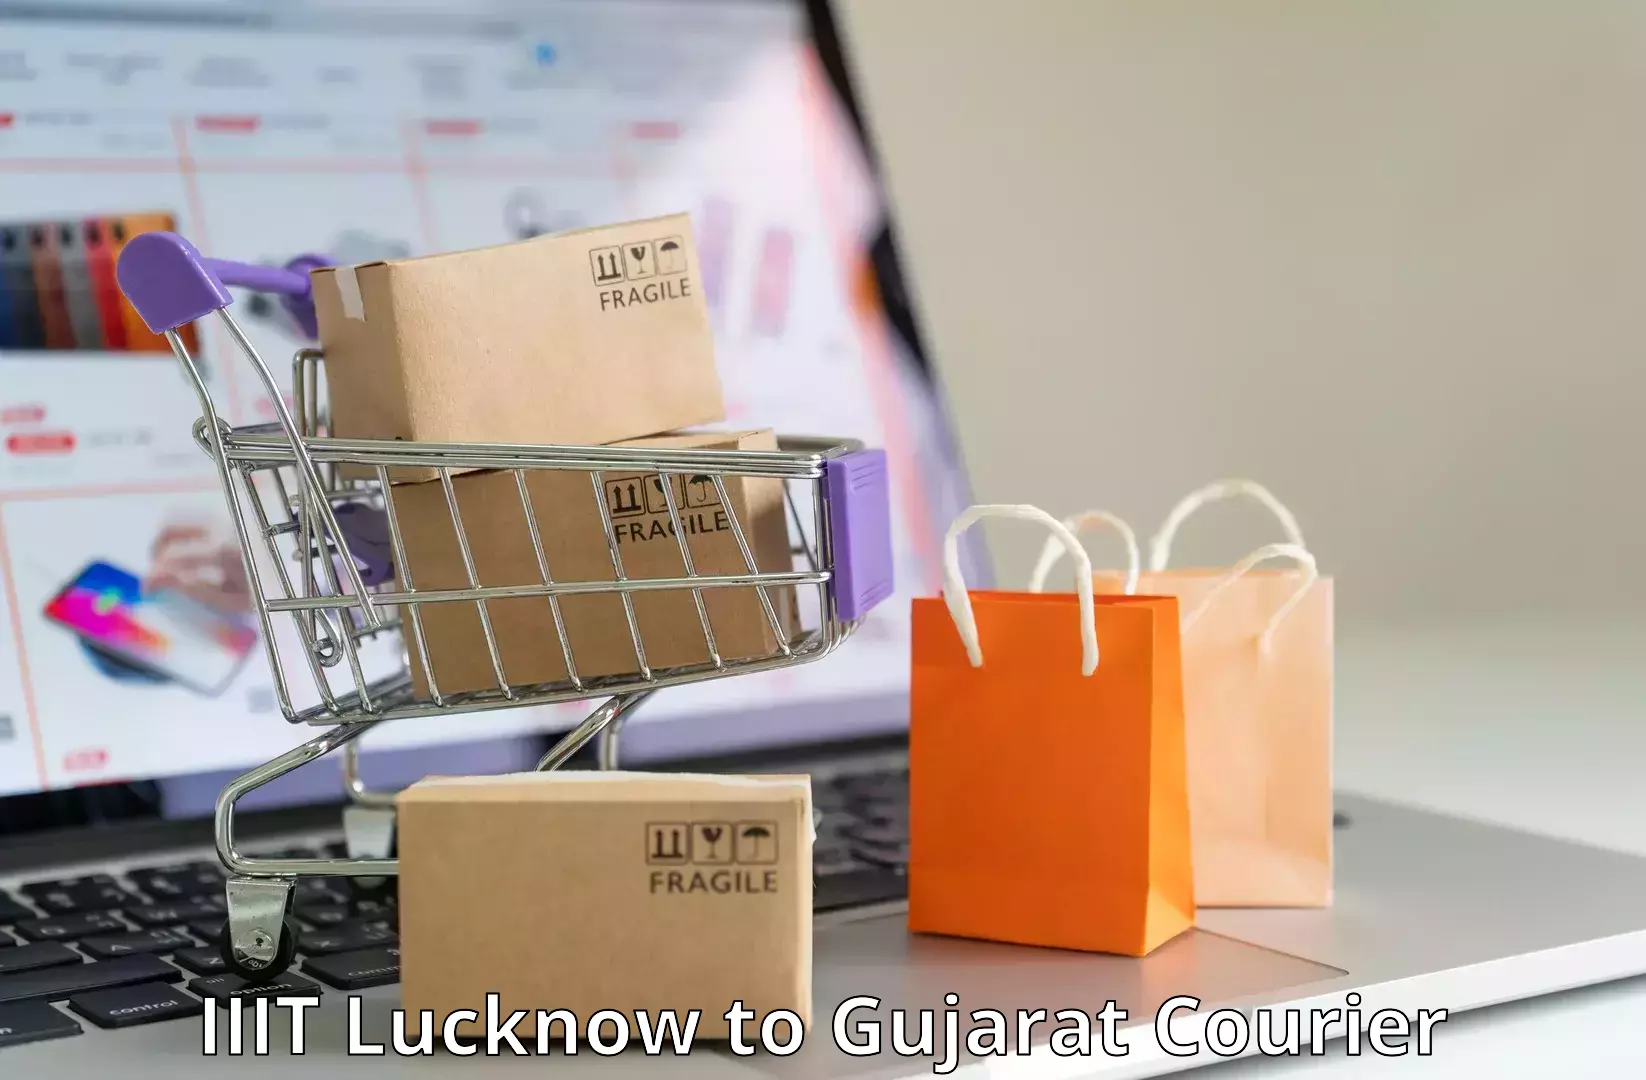 Global shipping networks in IIIT Lucknow to Gujarat